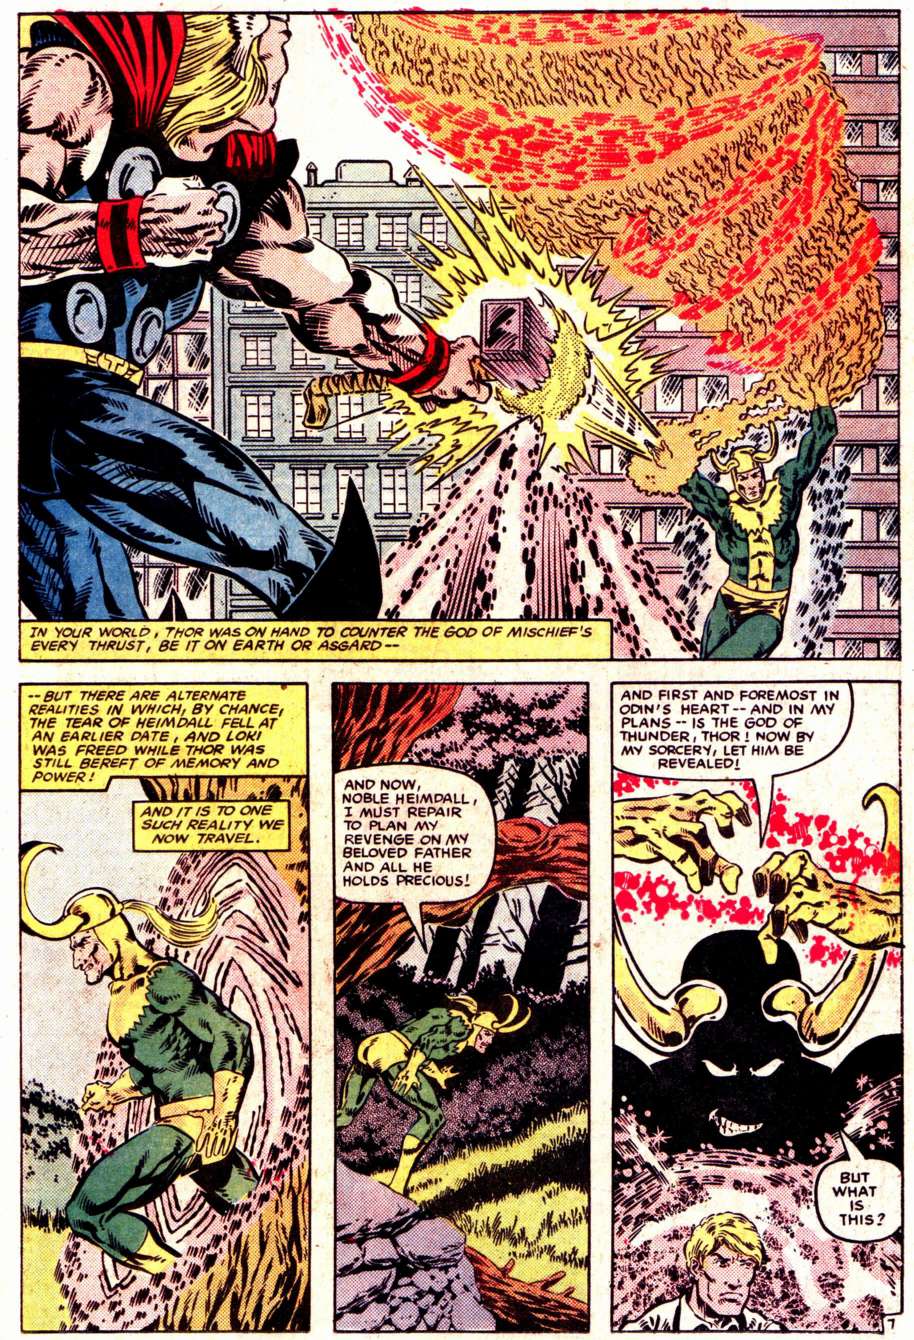 What If? (1977) issue 47 - Loki had found The hammer of Thor - Page 8